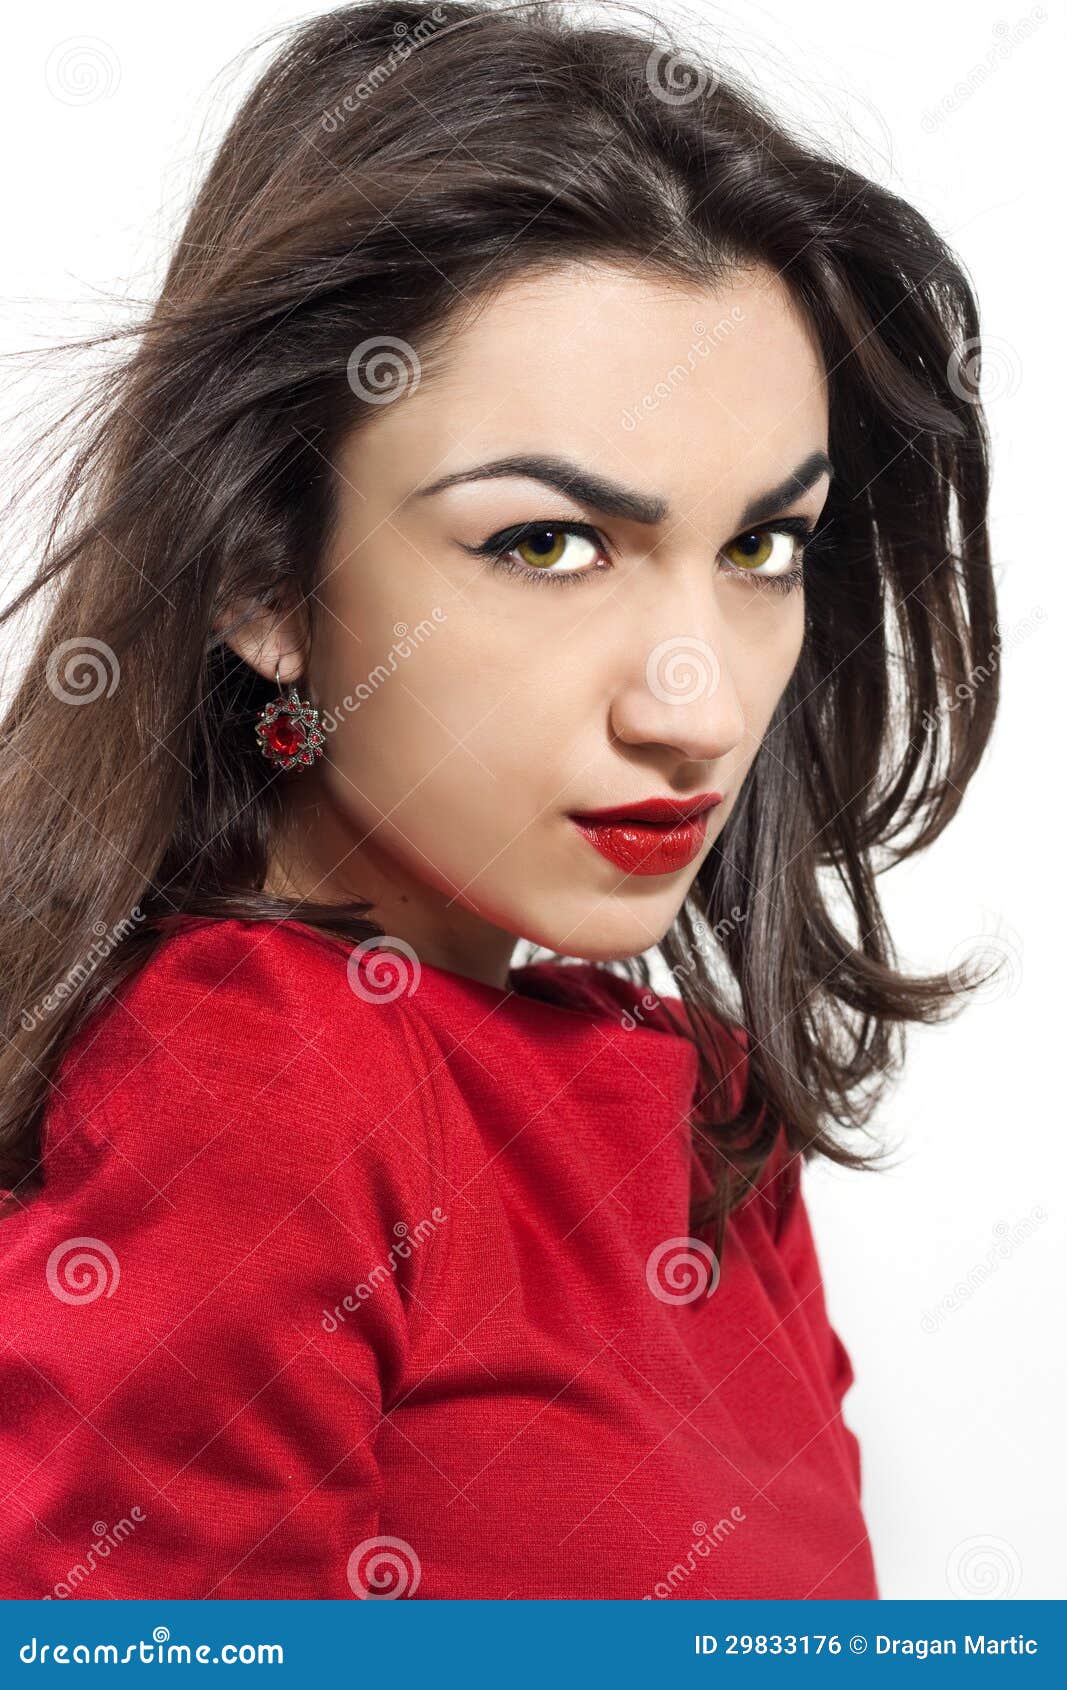 Attractive Black Woman with Makeup Stock Photo - Image of portrait ...